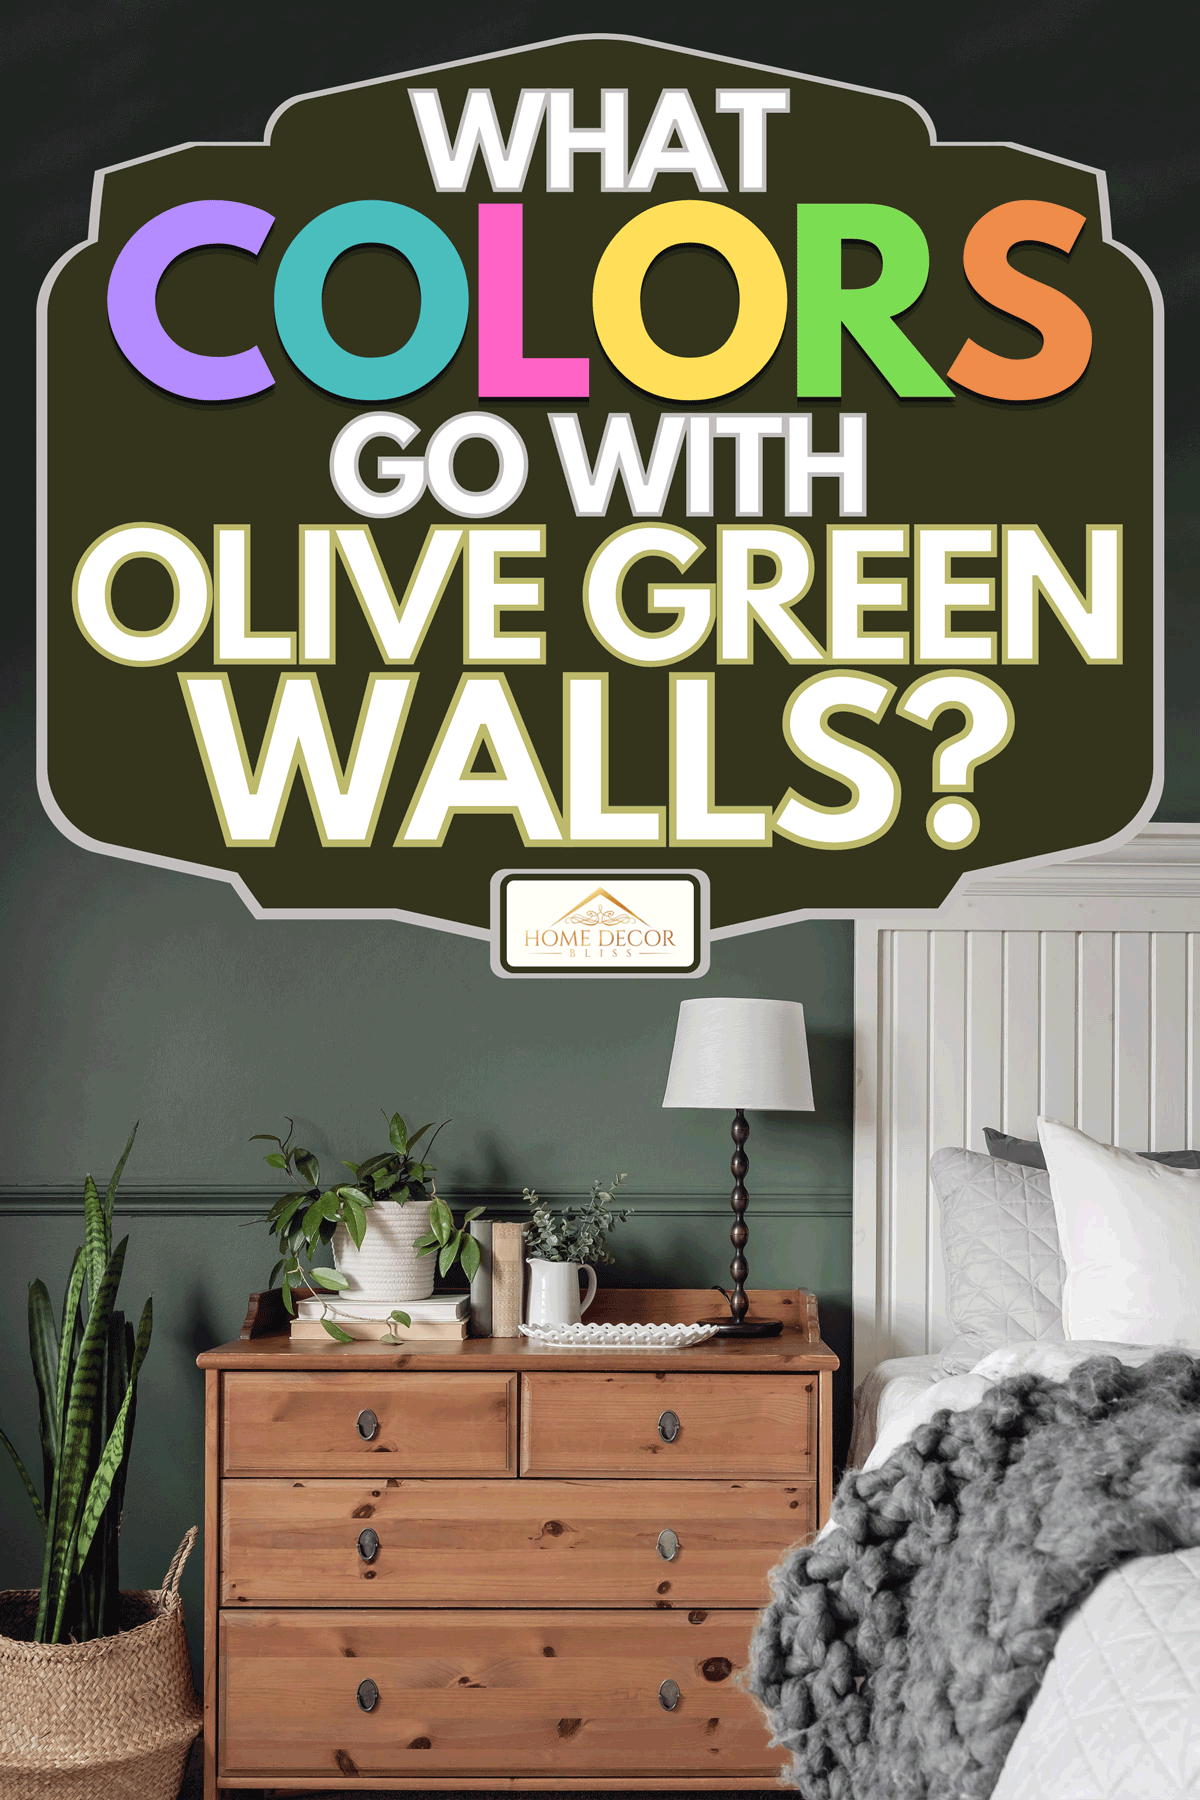 An interior green boho bedroom with plants, What Colors Go With Olive Green Walls?